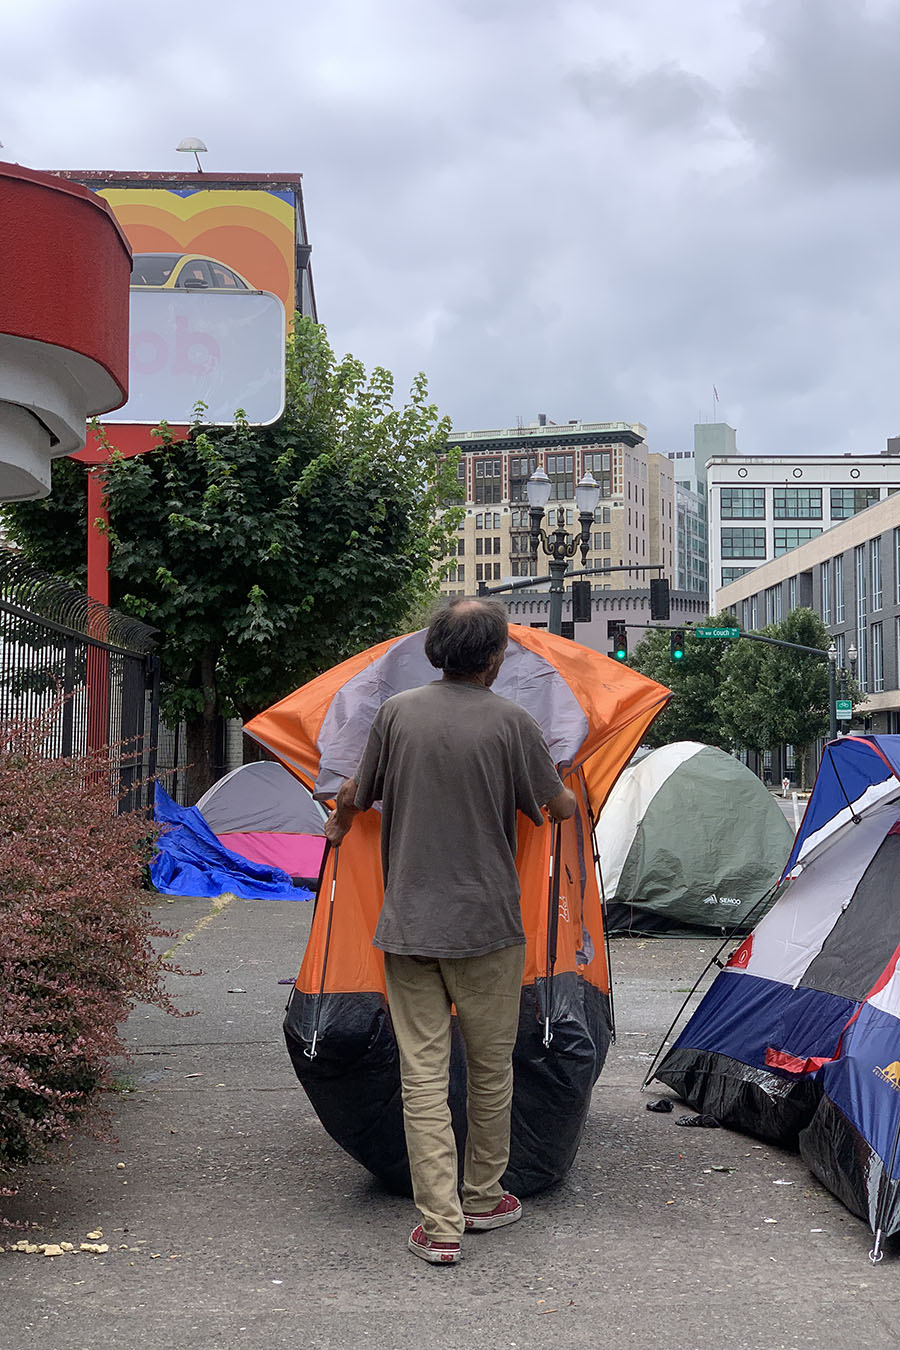 A view of a man from behind. He walks on the sidewalk holding a tent in his arms.